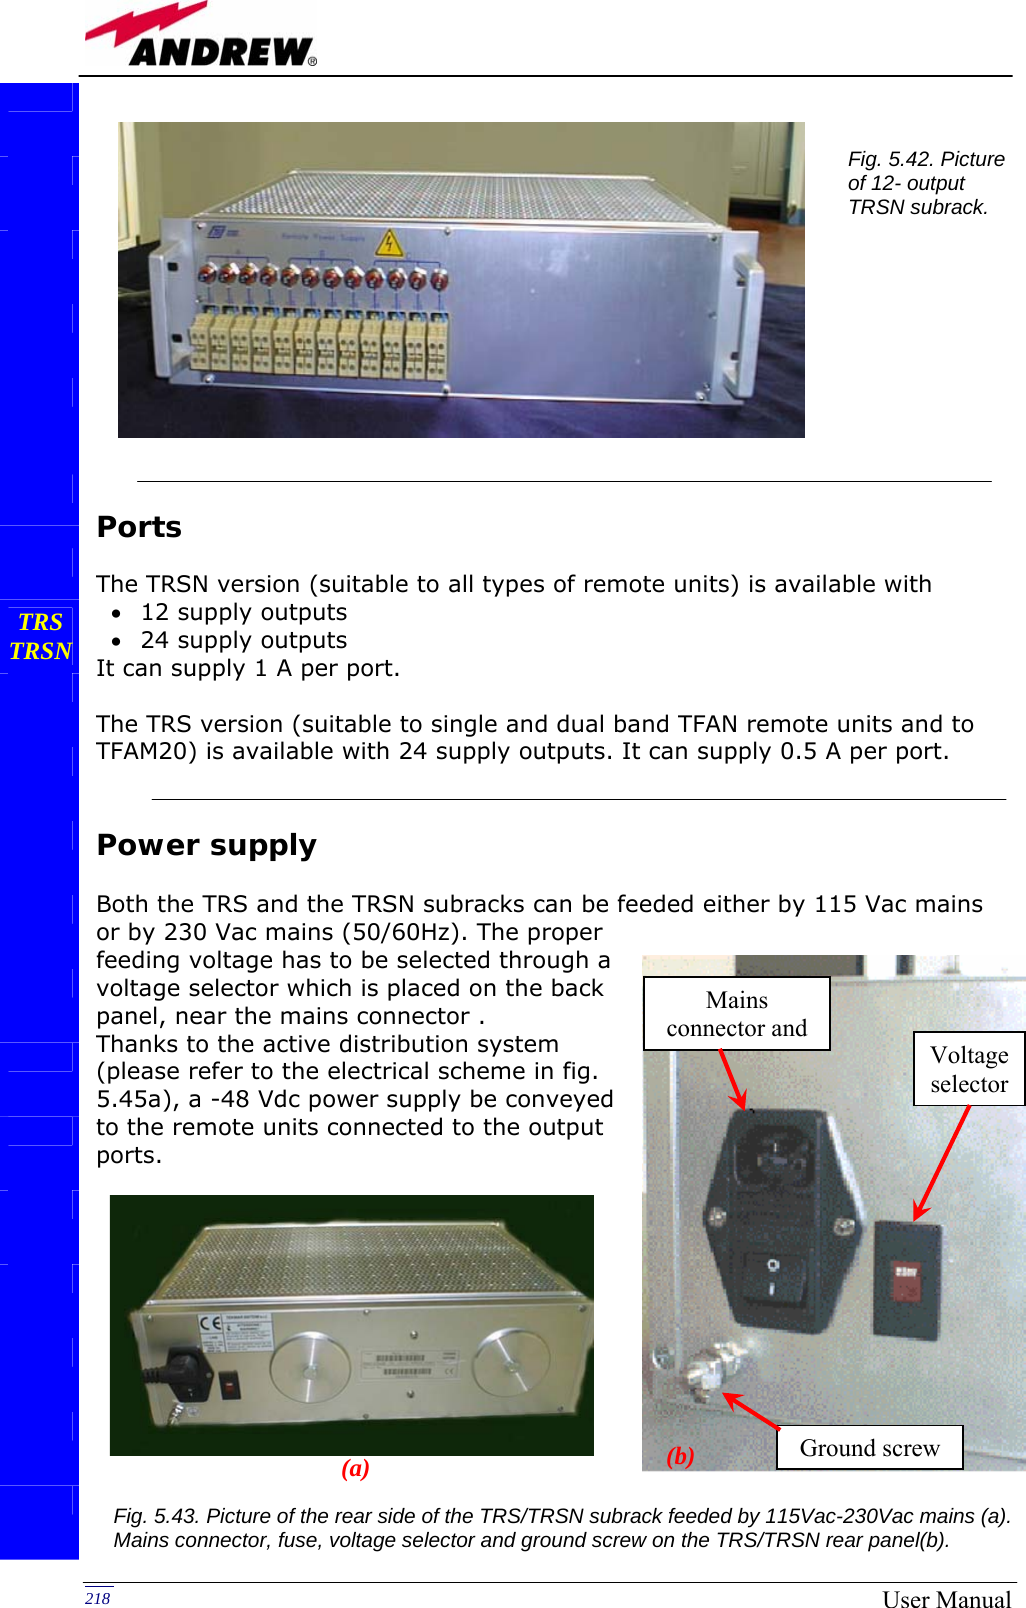   218  User Manual           Ports  The TRSN version (suitable to all types of remote units) is available with • 12 supply outputs • 24 supply outputs It can supply 1 A per port.  The TRS version (suitable to single and dual band TFAN remote units and to TFAM20) is available with 24 supply outputs. It can supply 0.5 A per port.   Power supply  Both the TRS and the TRSN subracks can be feeded either by 115 Vac mains or by 230 Vac mains (50/60Hz). The proper  feeding voltage has to be selected through a voltage selector which is placed on the back panel, near the mains connector . Thanks to the active distribution system (please refer to the electrical scheme in fig. 5.45a), a -48 Vdc power supply be conveyed to the remote units connected to the output ports.                      TRS TRSN             Fig. 5.42. Picture of 12- output TRSN subrack. Voltage selectorGround screw Mains connector and Fig. 5.43. Picture of the rear side of the TRS/TRSN subrack feeded by 115Vac-230Vac mains (a). Mains connector, fuse, voltage selector and ground screw on the TRS/TRSN rear panel(b).  (a)  (b) 